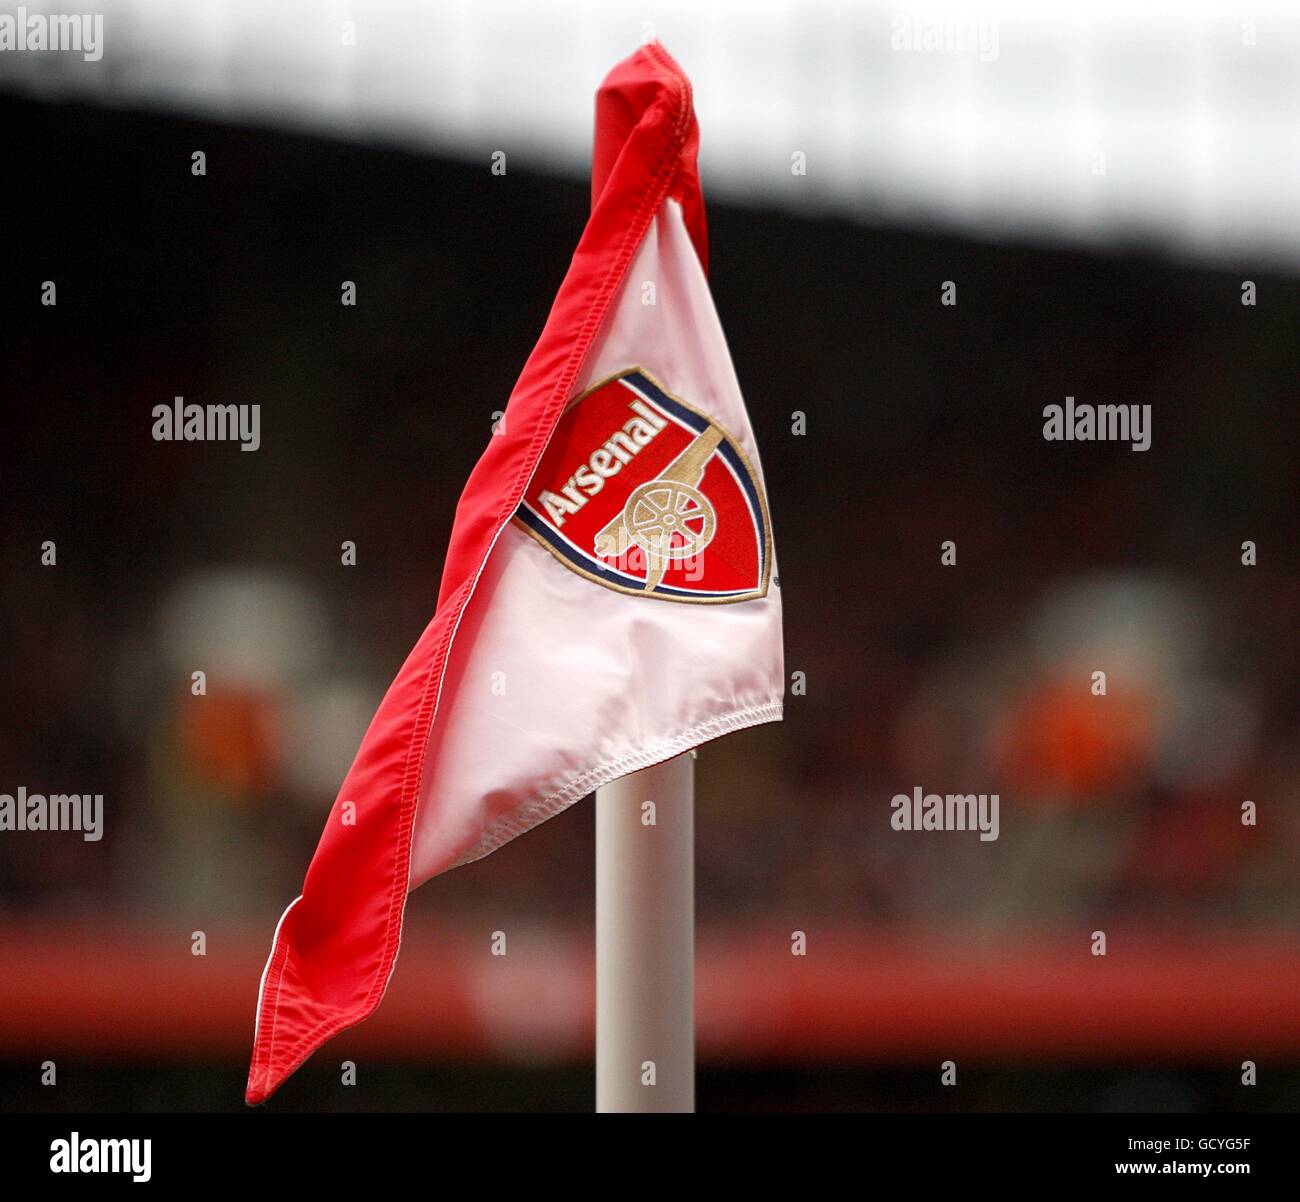 Soccer - FA Cup - Third Round - Arsenal v Leeds United - Emirates Stadium. A general view of an Arsenal crest on a corner flag. Stock Photo